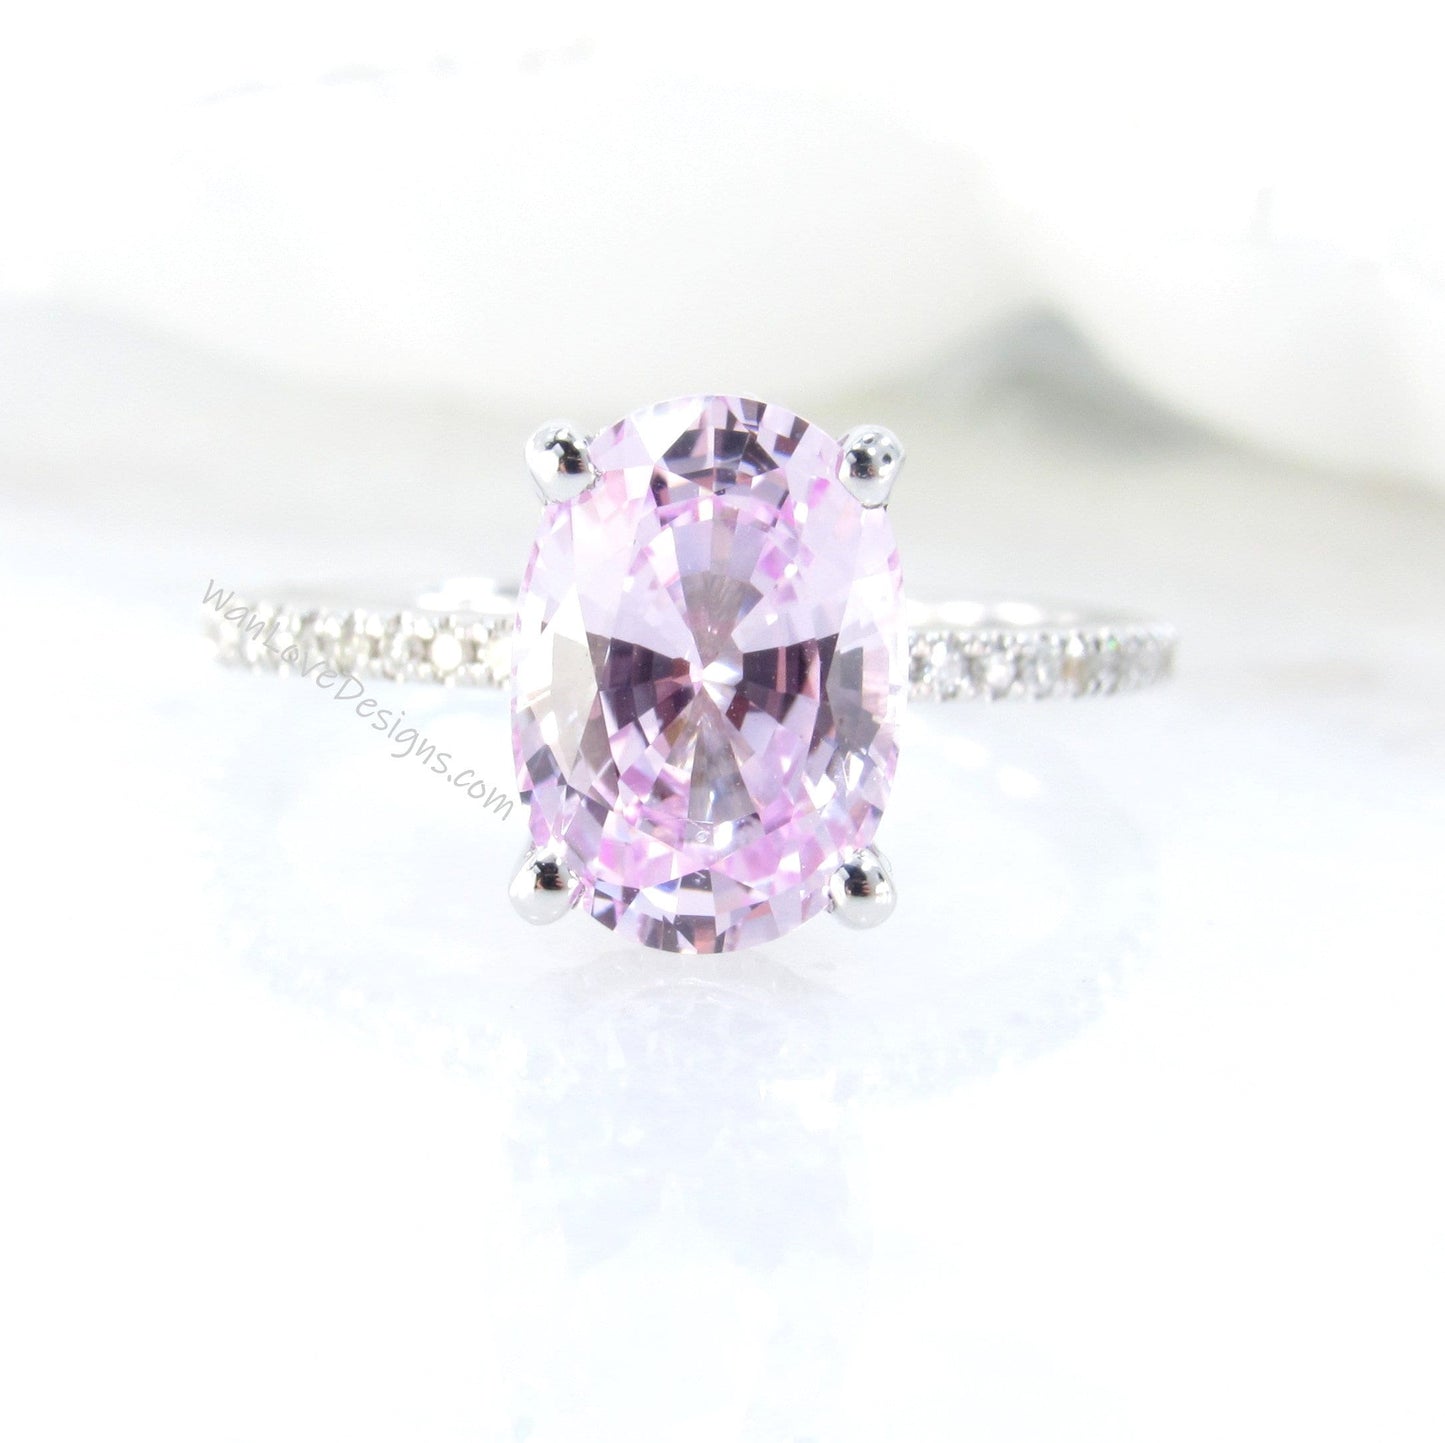 Light Pink Sapphire engagement ring diamond side halo ring 14k white gold diamond hidden halo almost eternity unique Promise Bridal ring Wan Love Designs